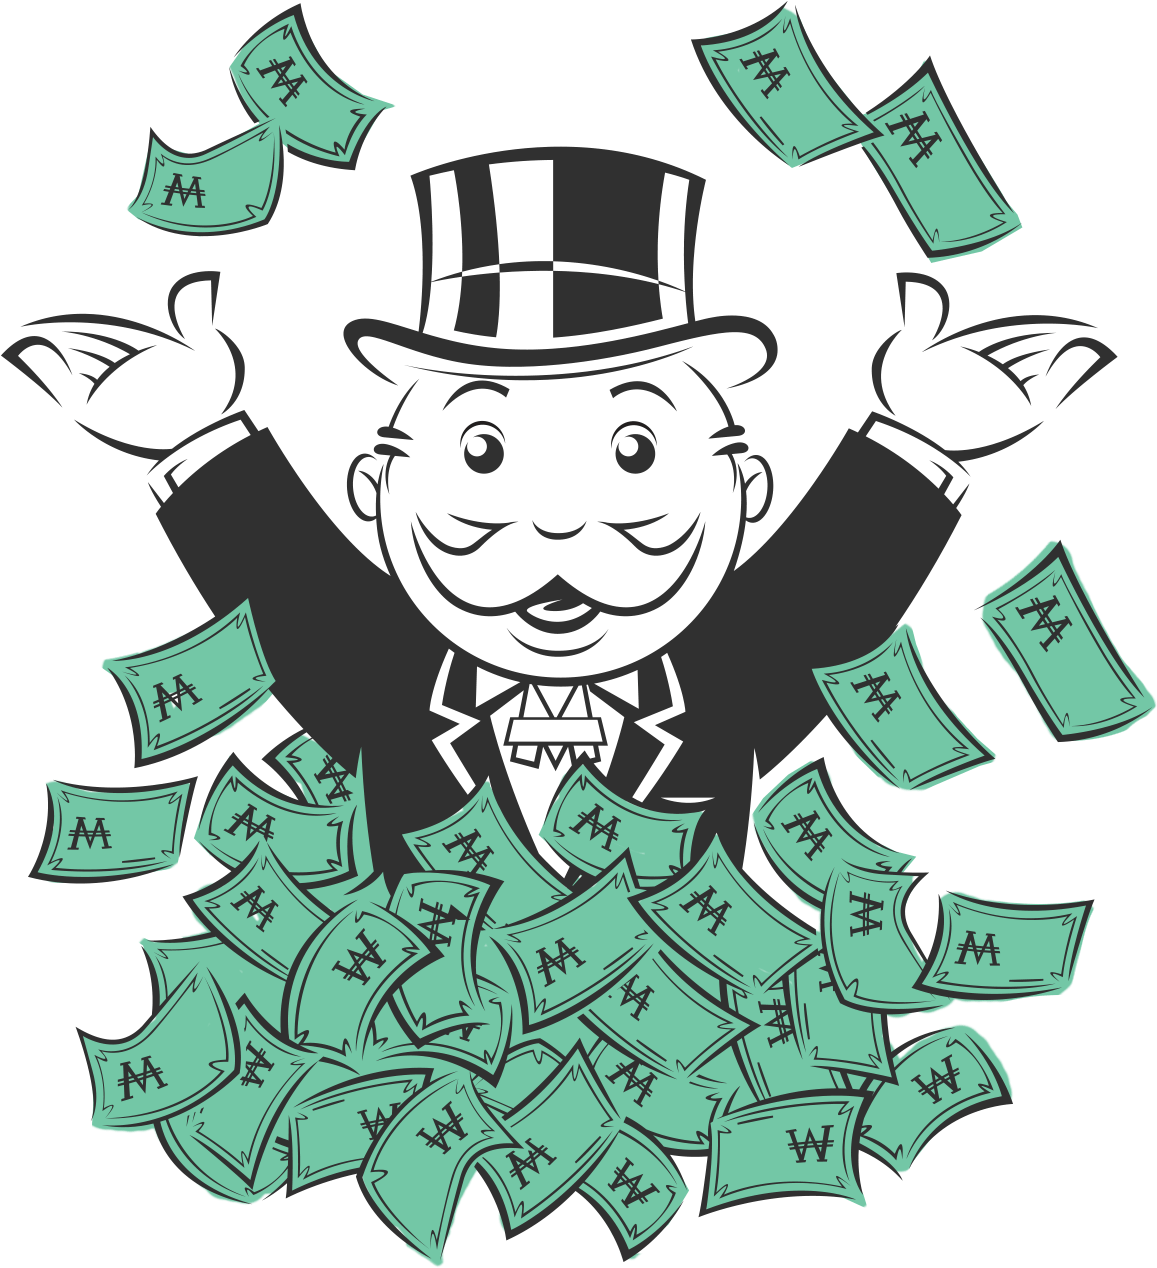 1947128 Monopoly Man With Money 1166x1273 Png Clipart Download